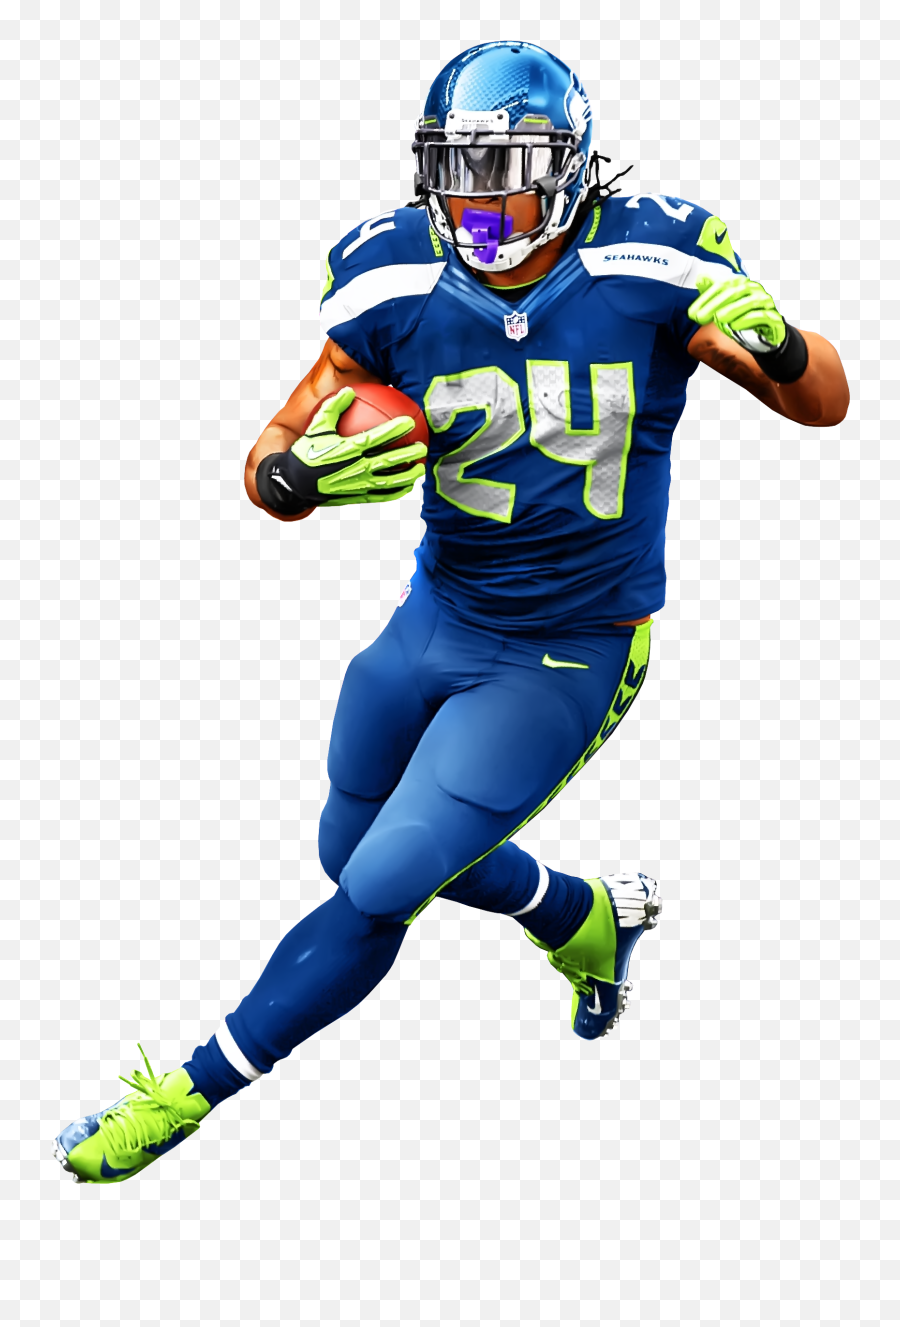 American Football Player Png Image - Transparent American Football Player,American Football Player Png